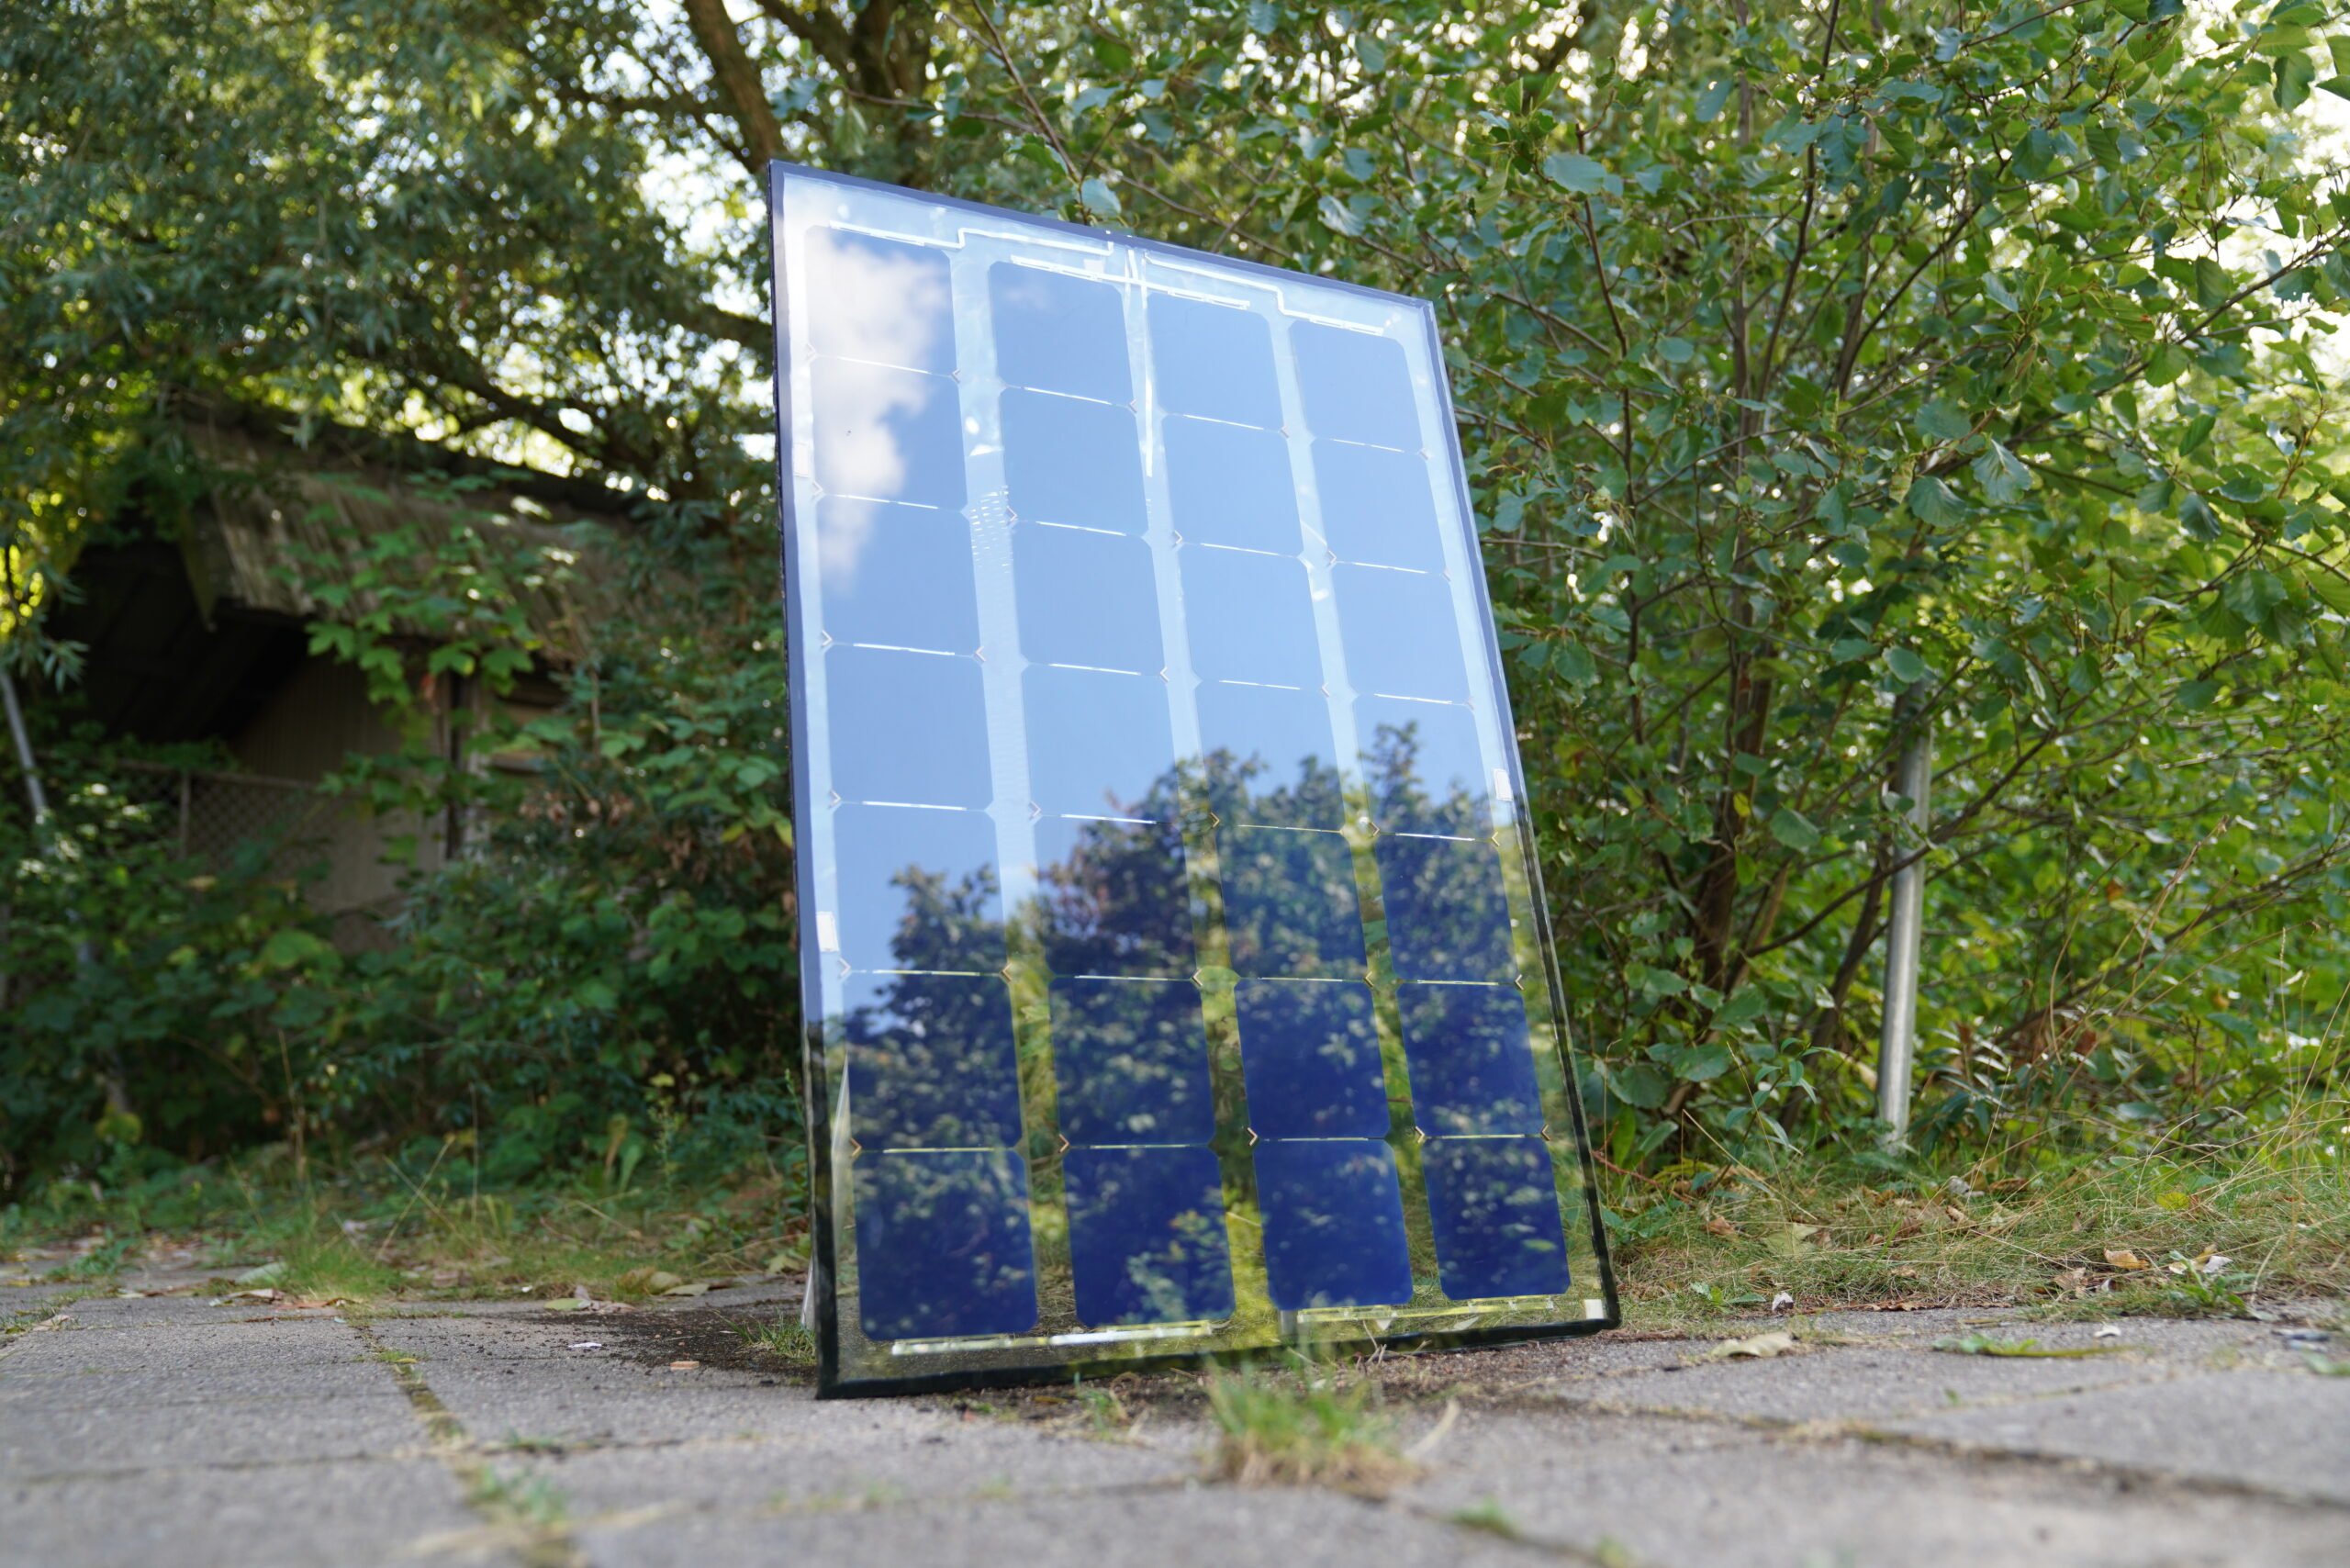 Biosphere Solar aims for a sustainable solar panel industry 